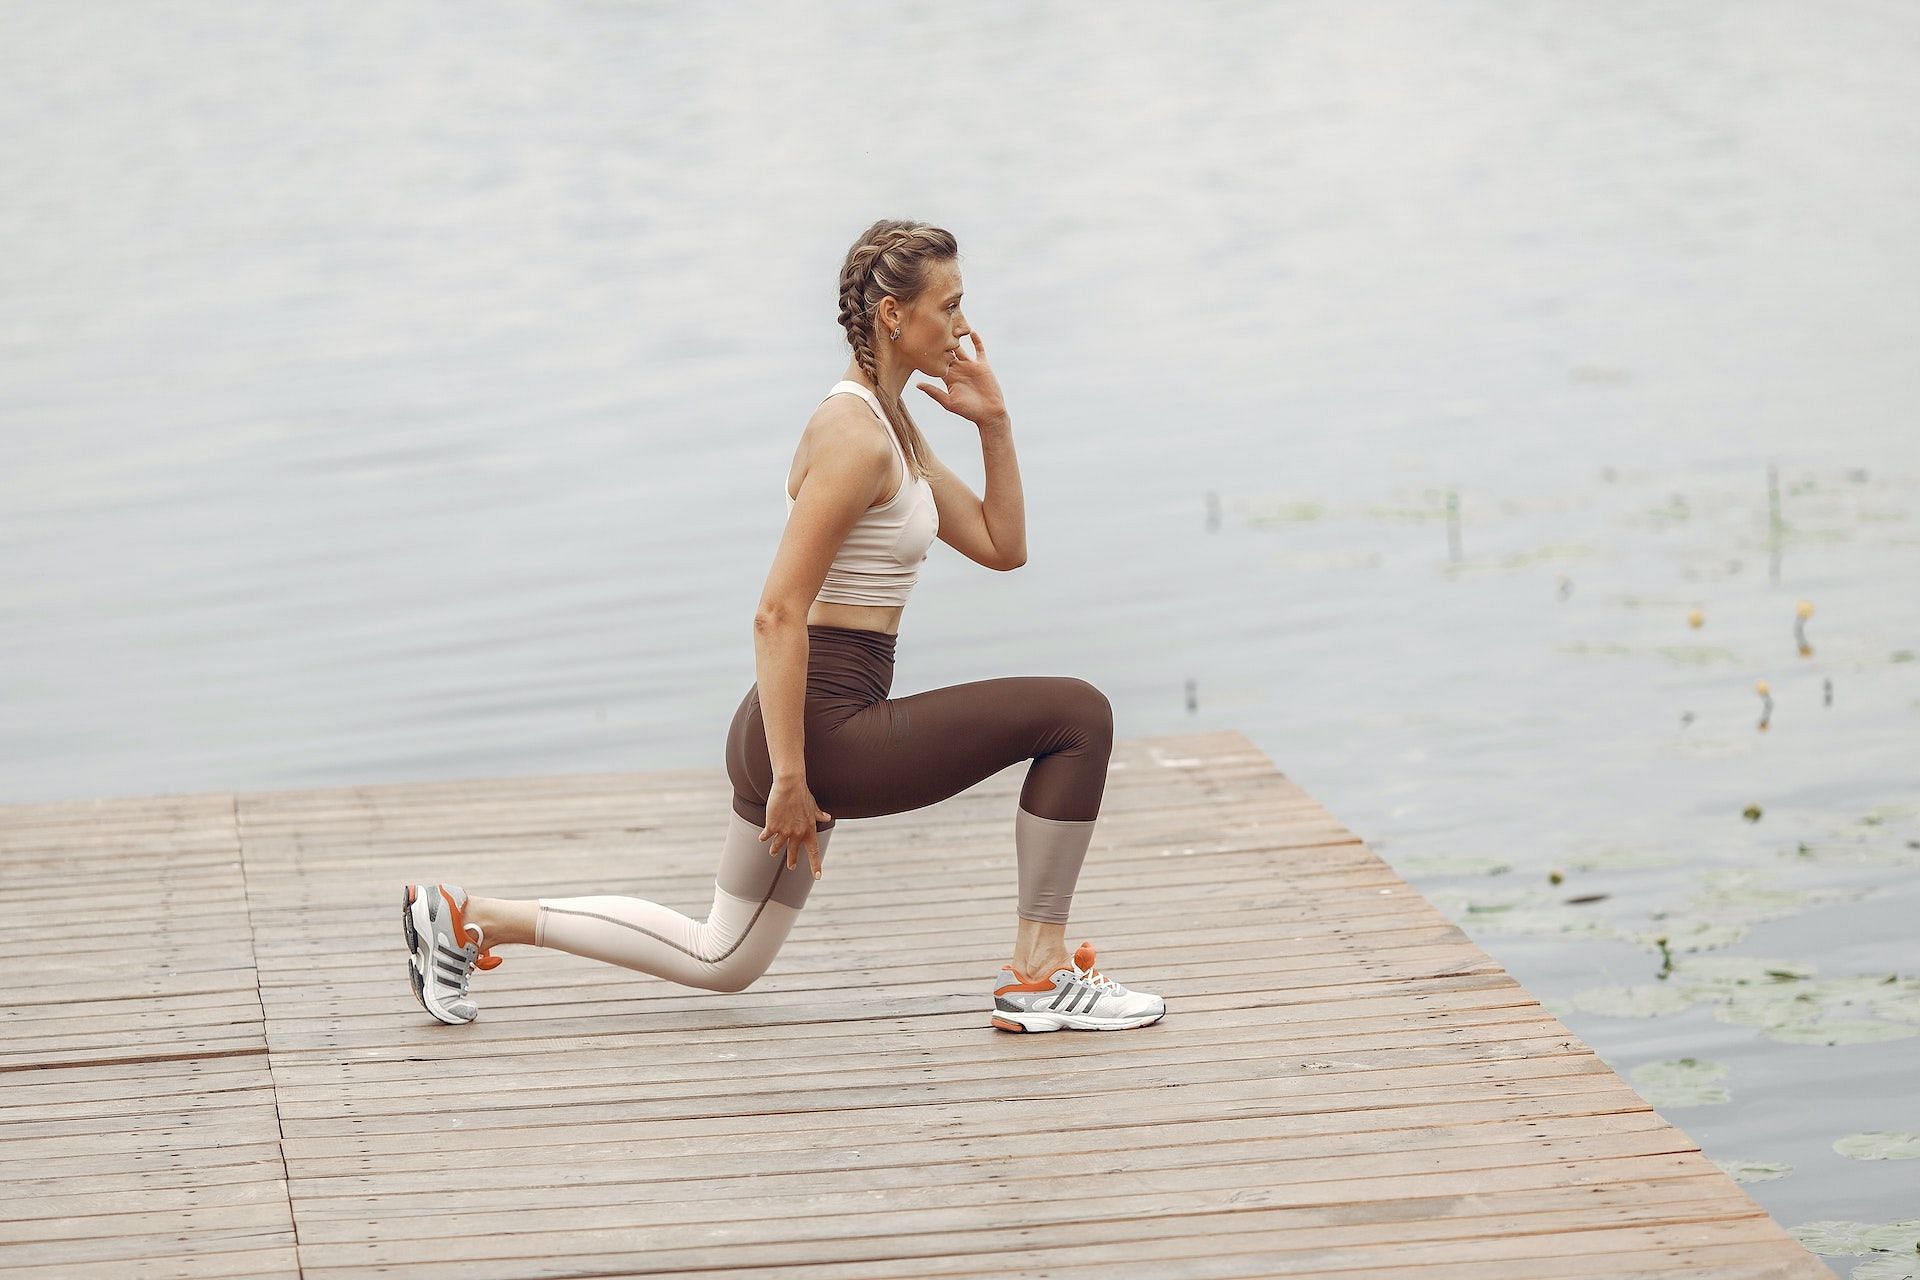 Reverse lunges are great pistol squat exercise alternatives that offer single-leg benefits. (Photo via Pexels/Gustavo Fring)